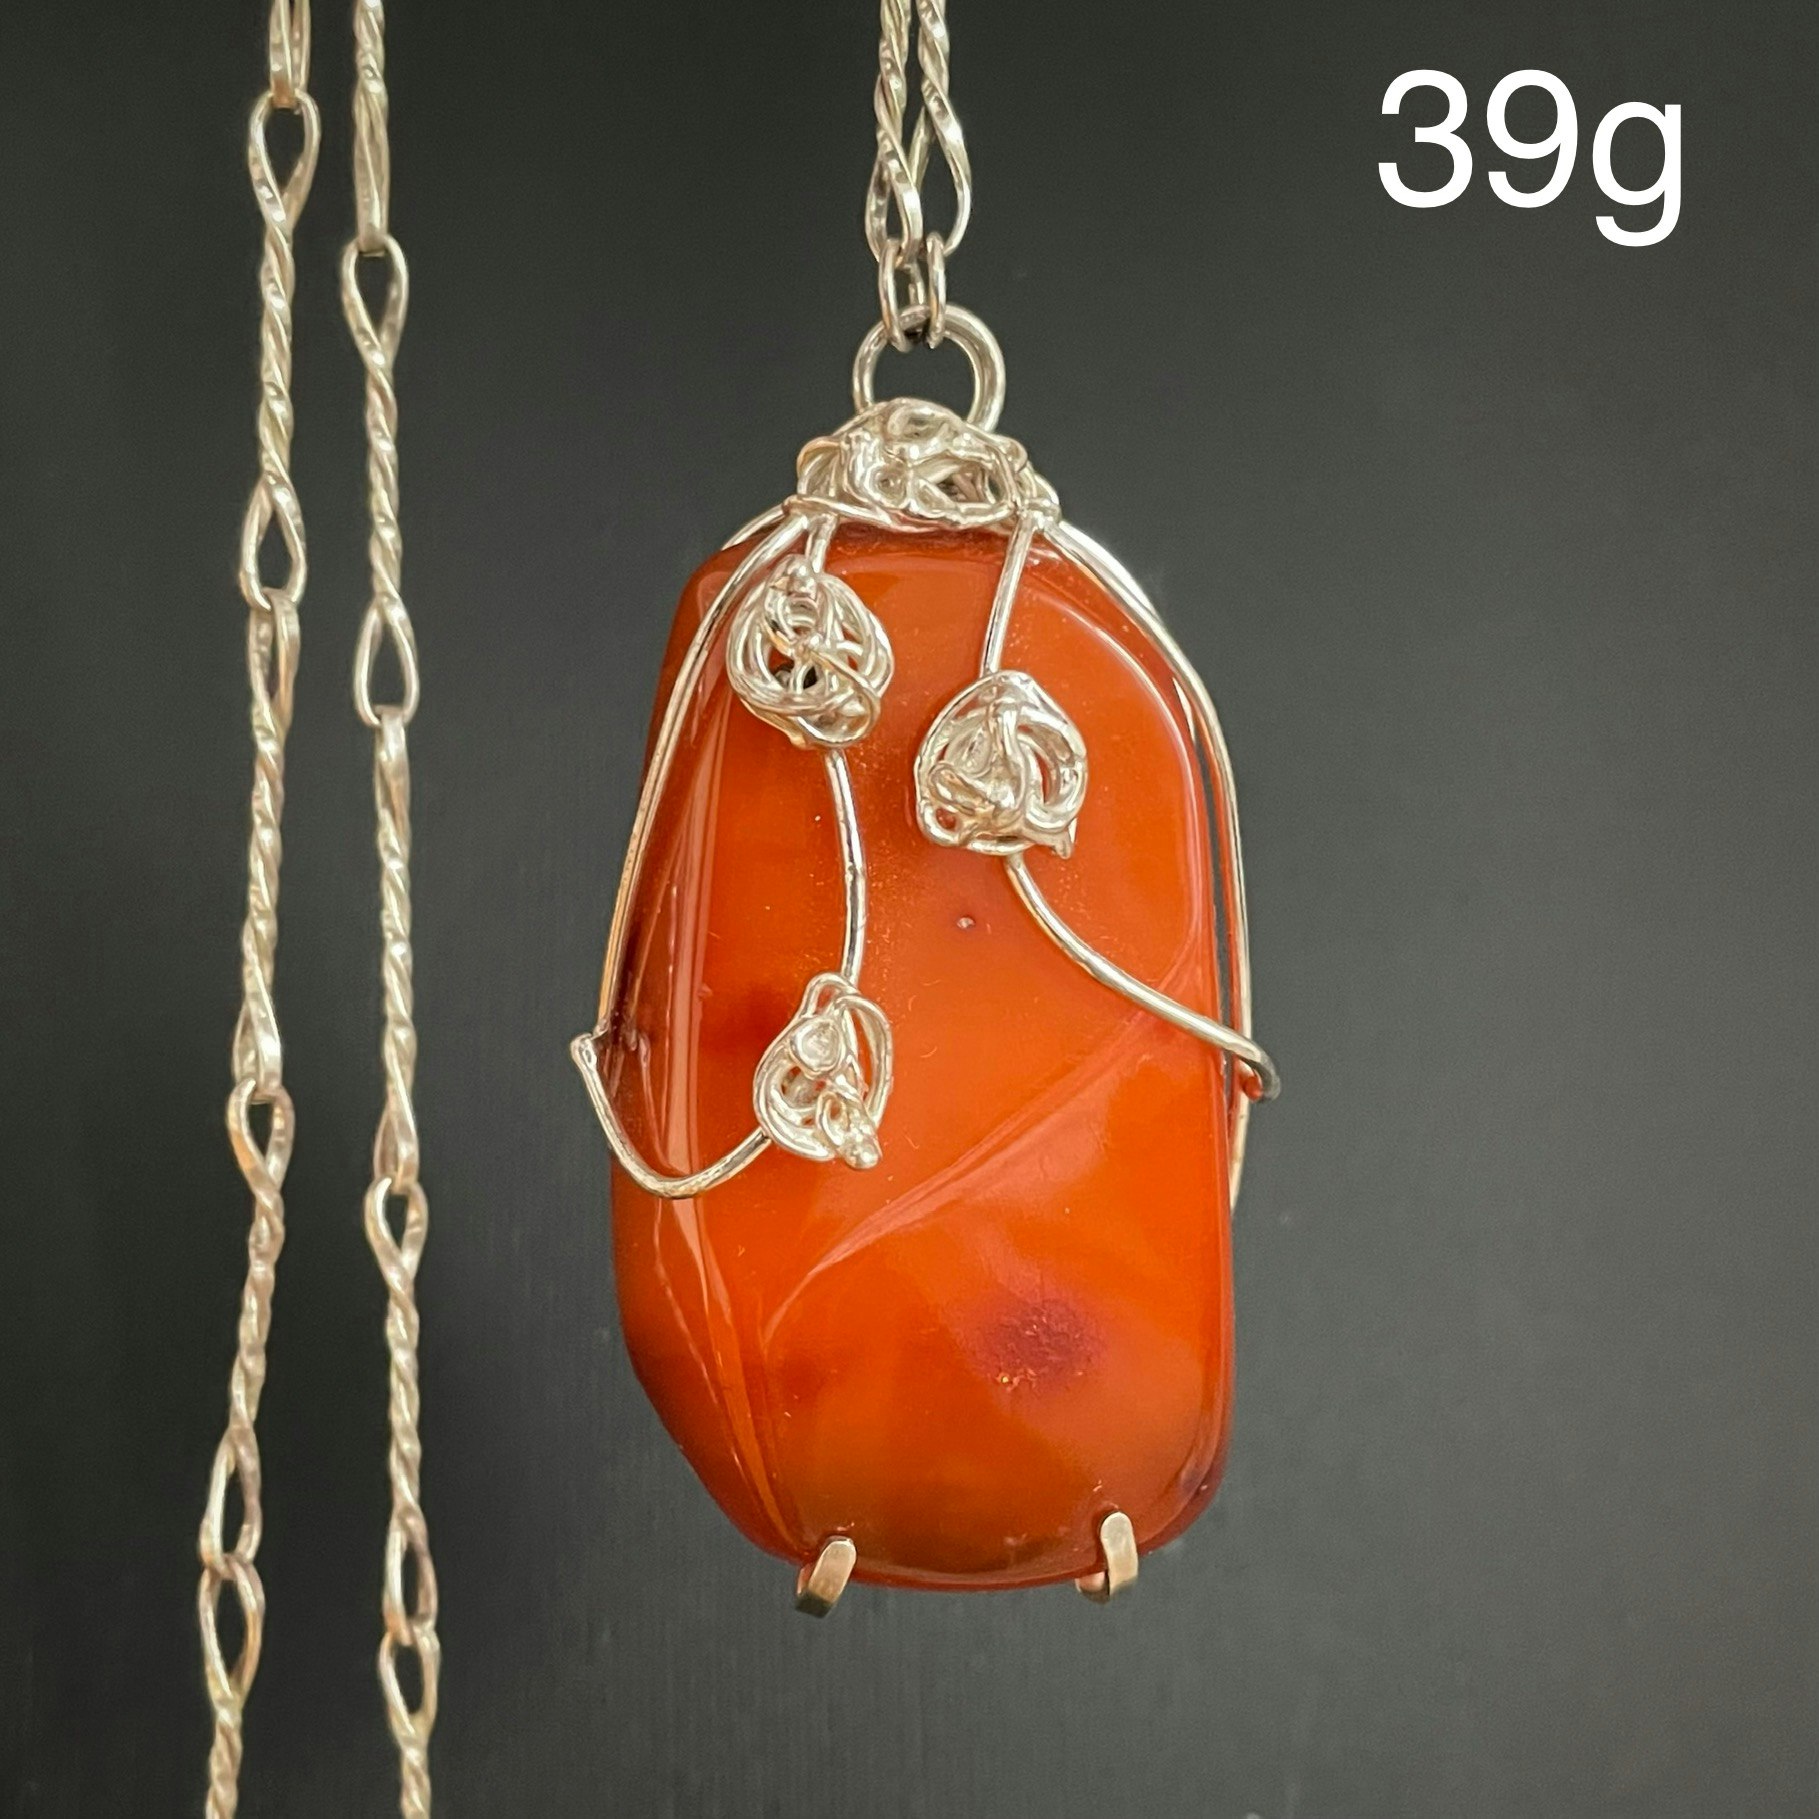 Amazon.com: PEORA Genuine Baltic Amber Pendant Necklace for Women 925  Sterling Silver, Rich Cognac Color Solitaire Ball with 18 inch Chain :  Peora: Clothing, Shoes & Jewelry